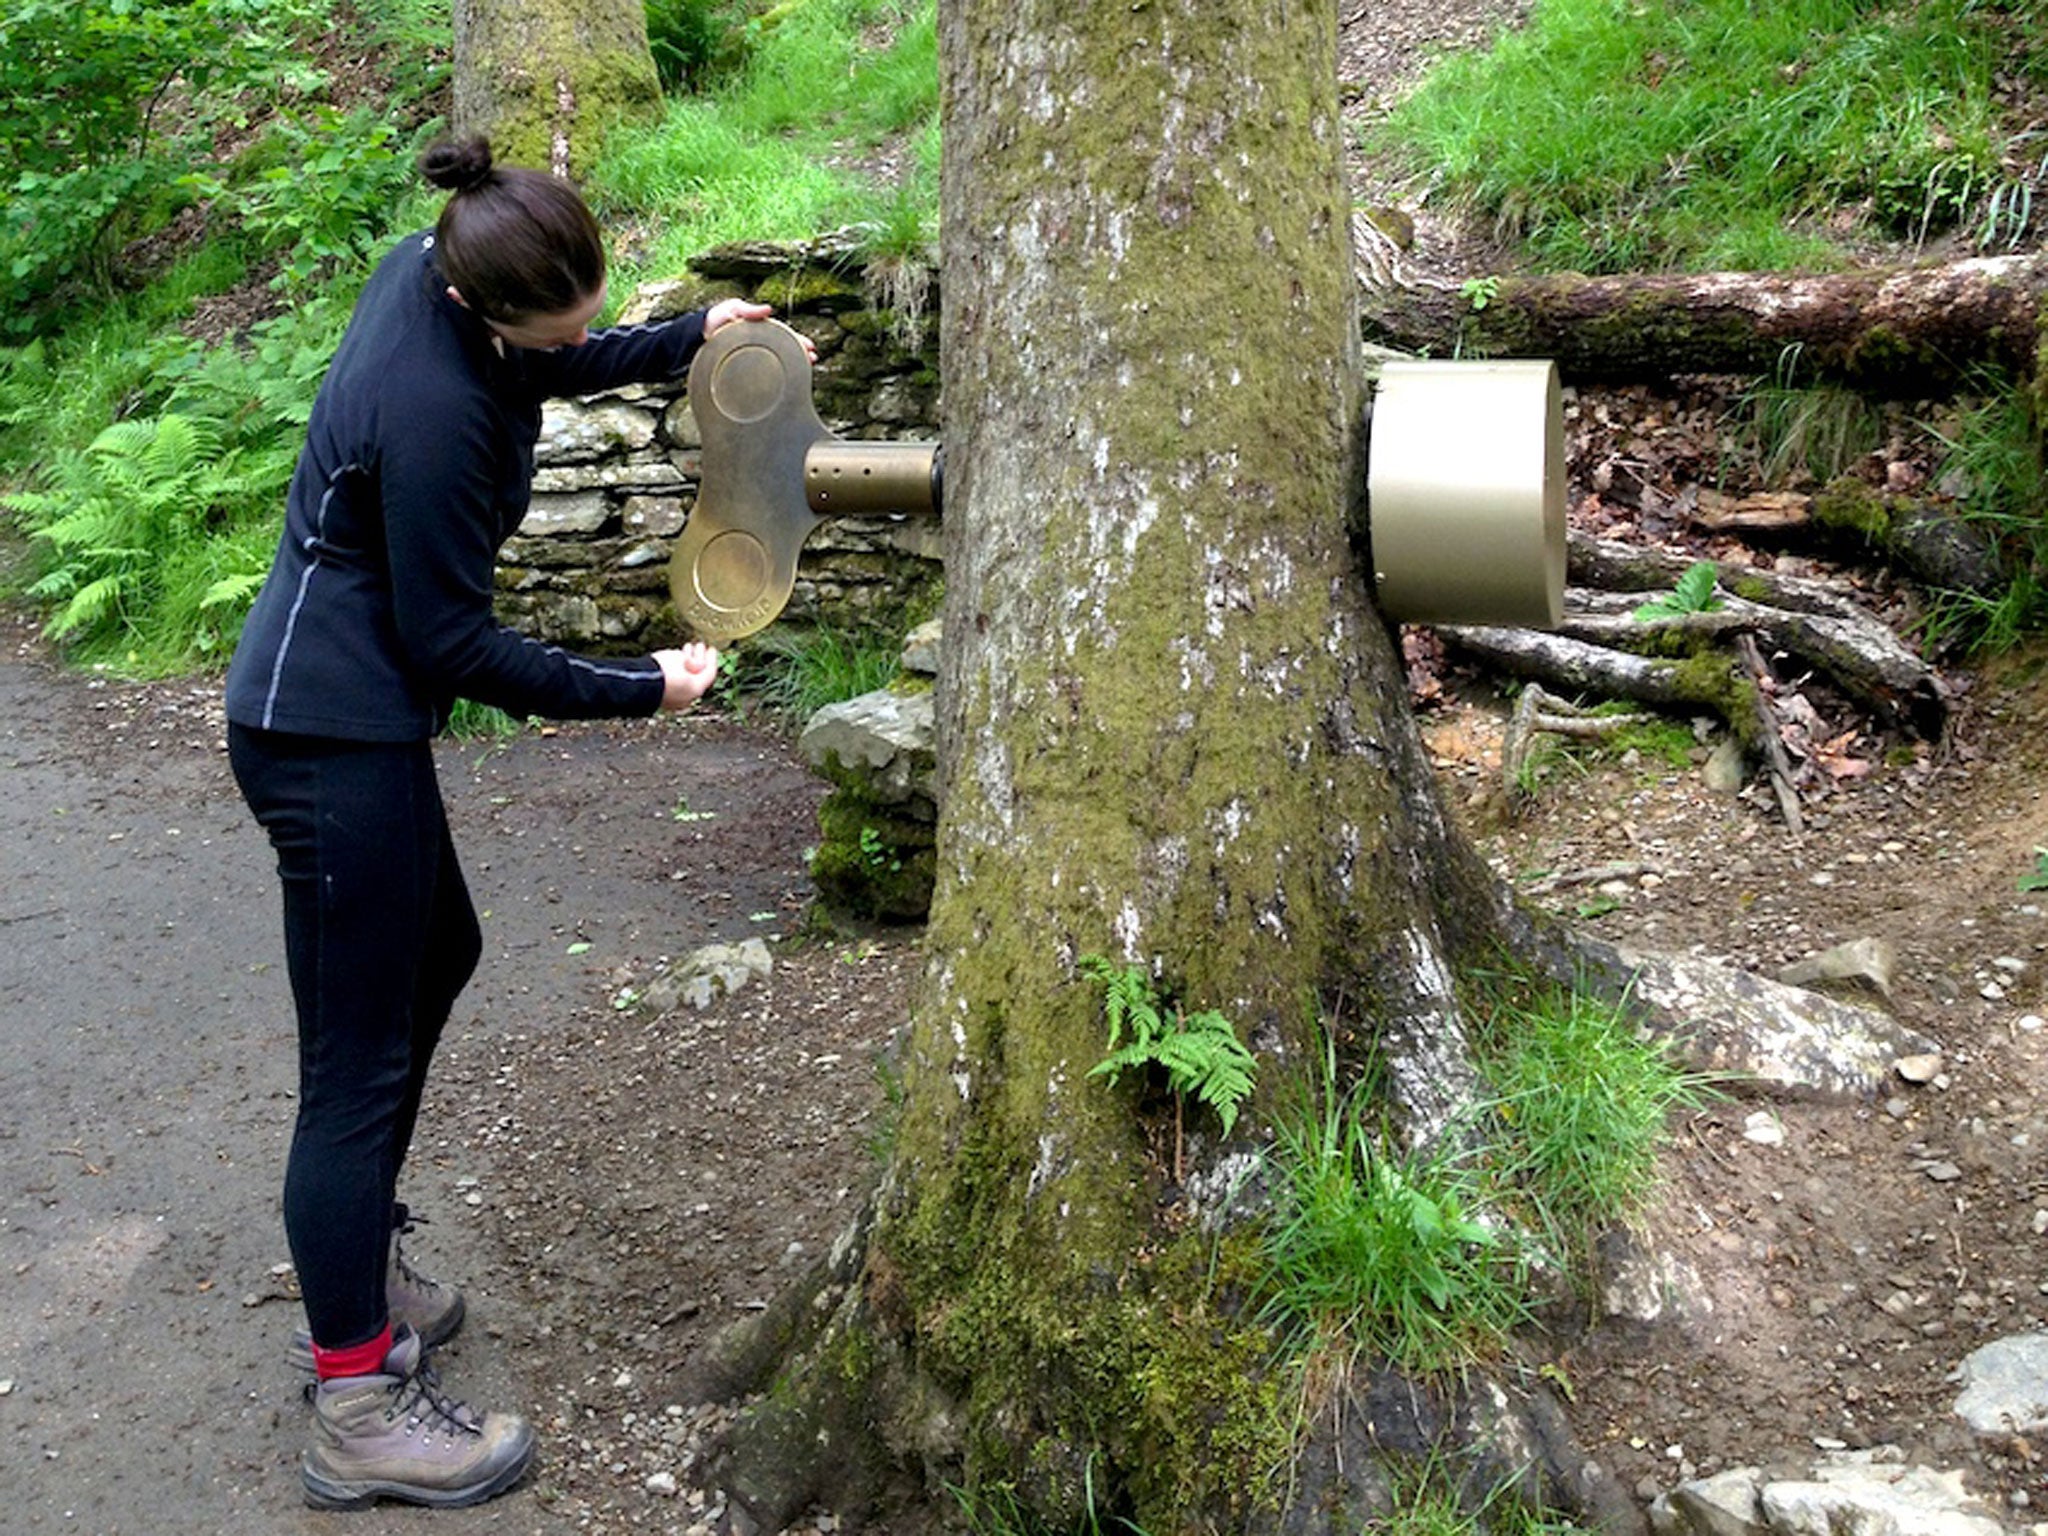 Song of the forest: Grizedale’s musical tree